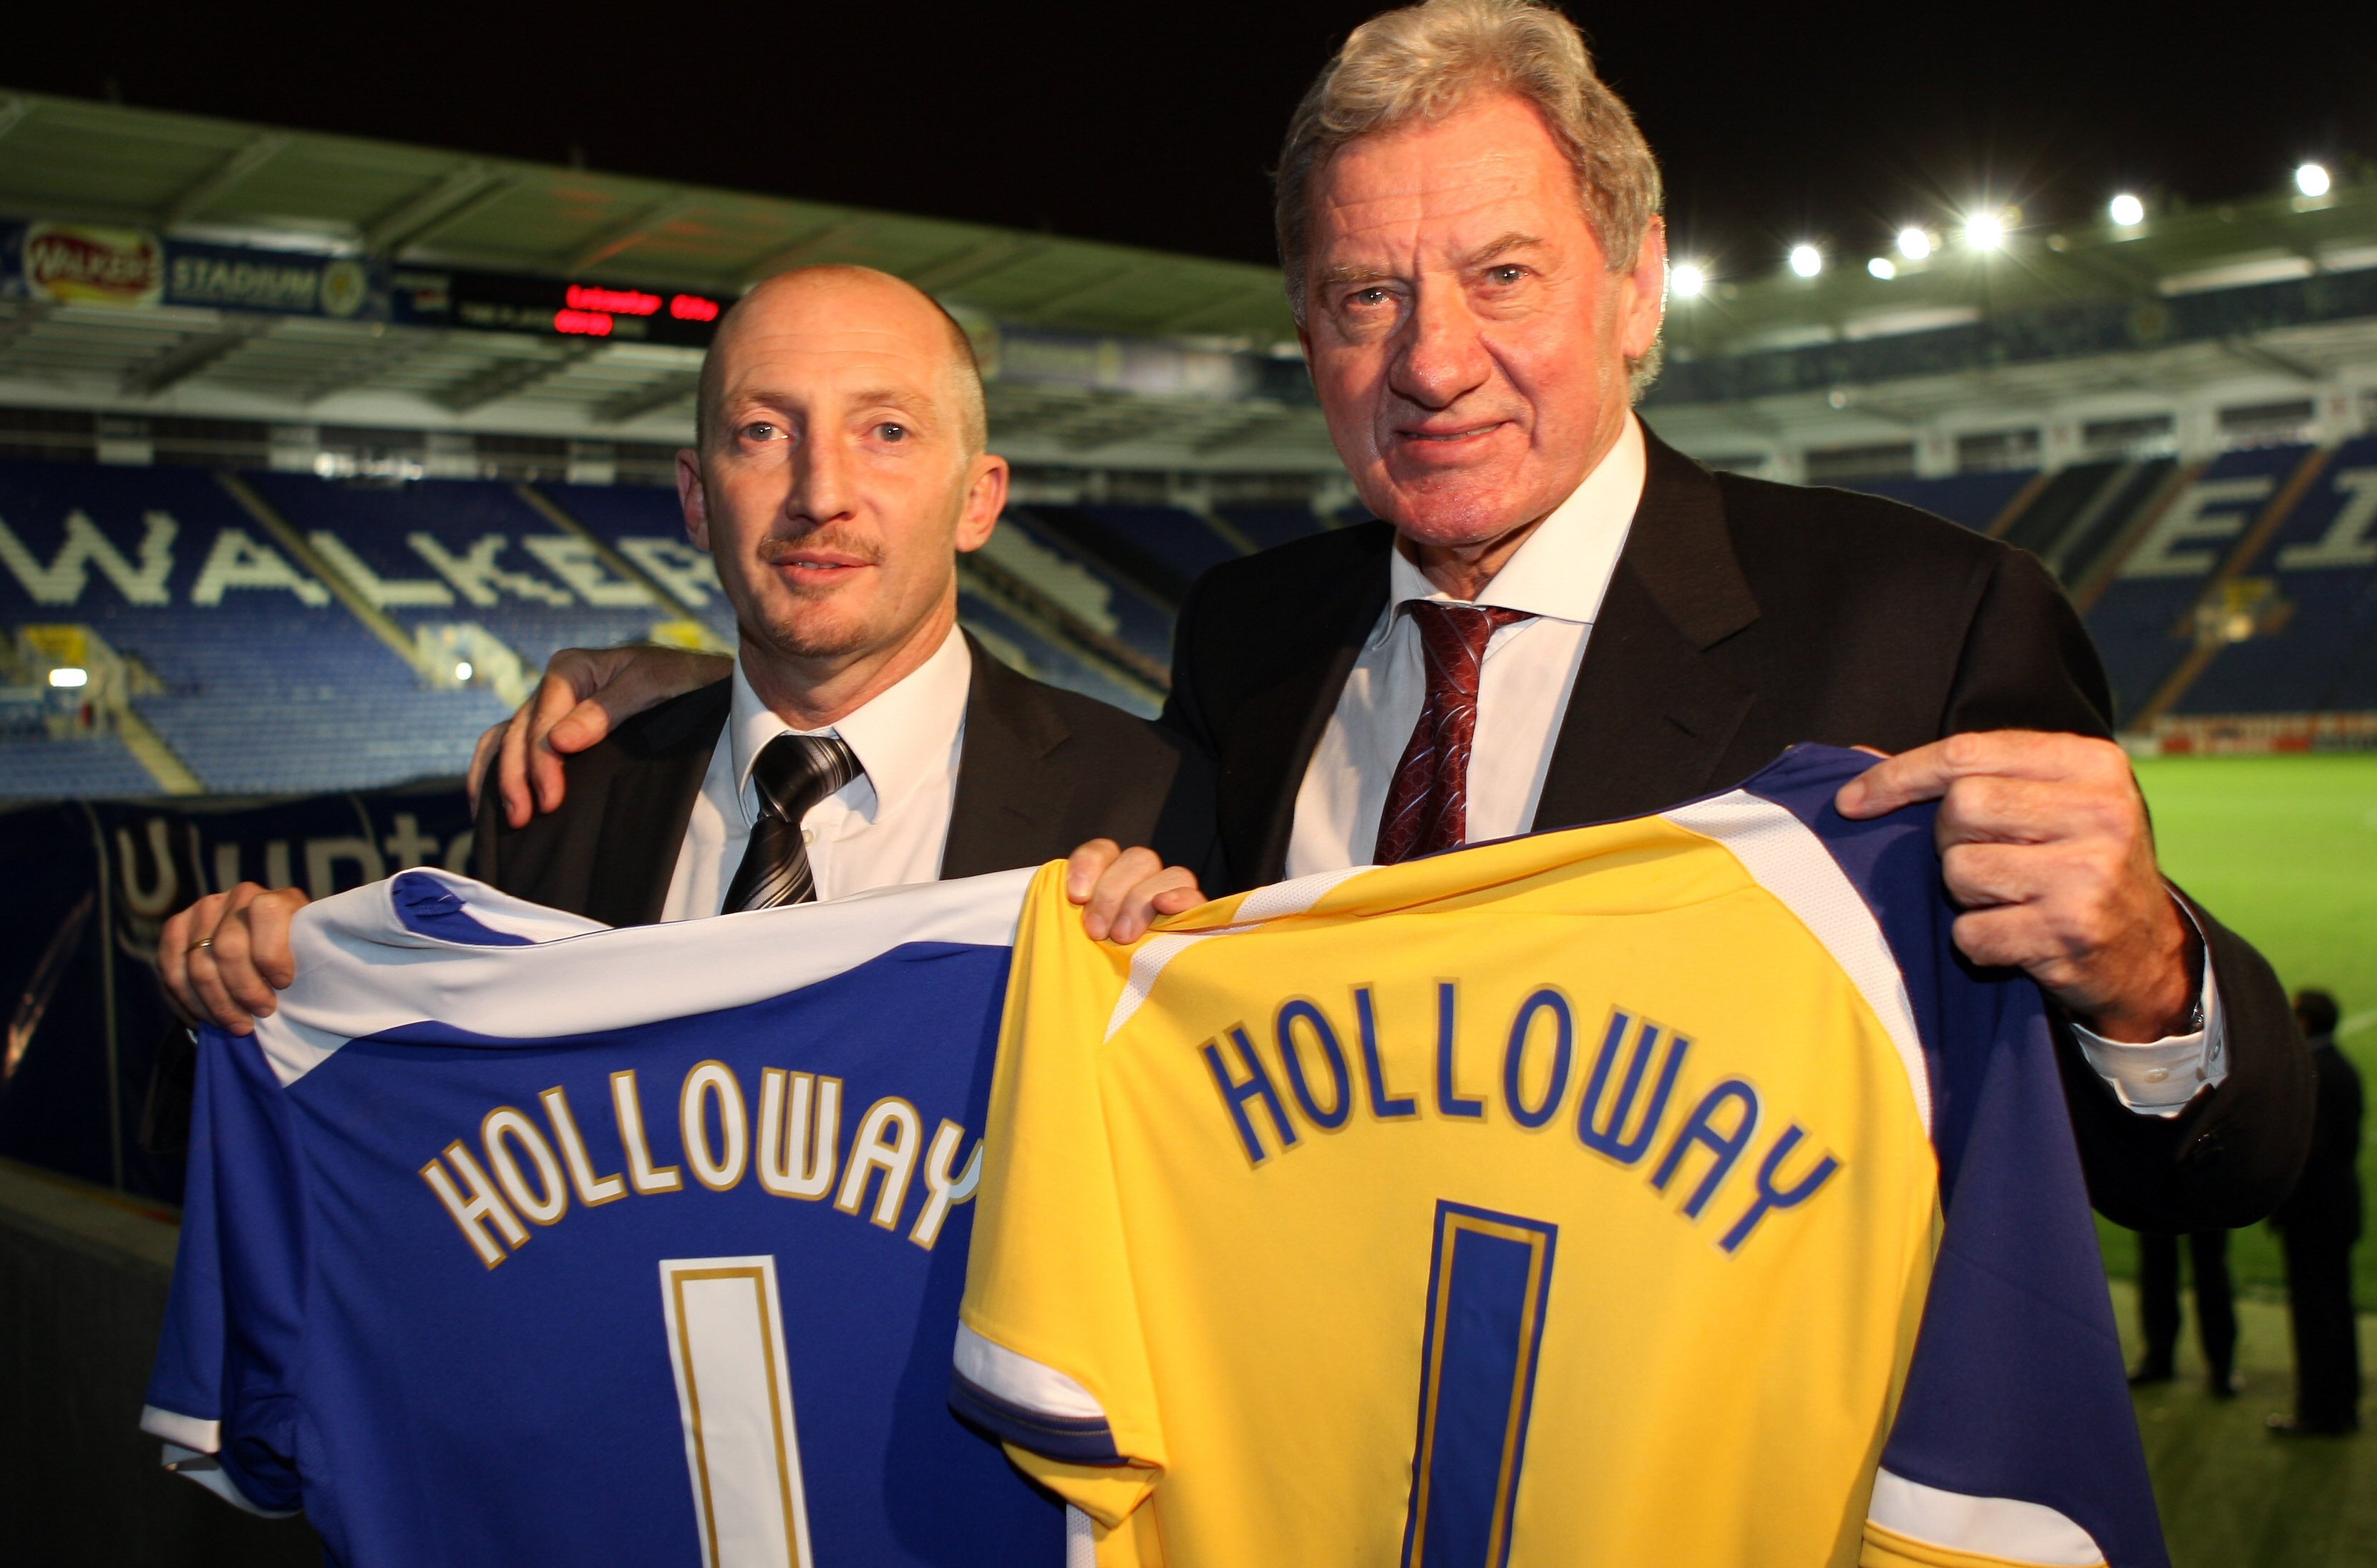 Ian Holloway was appointed the manager